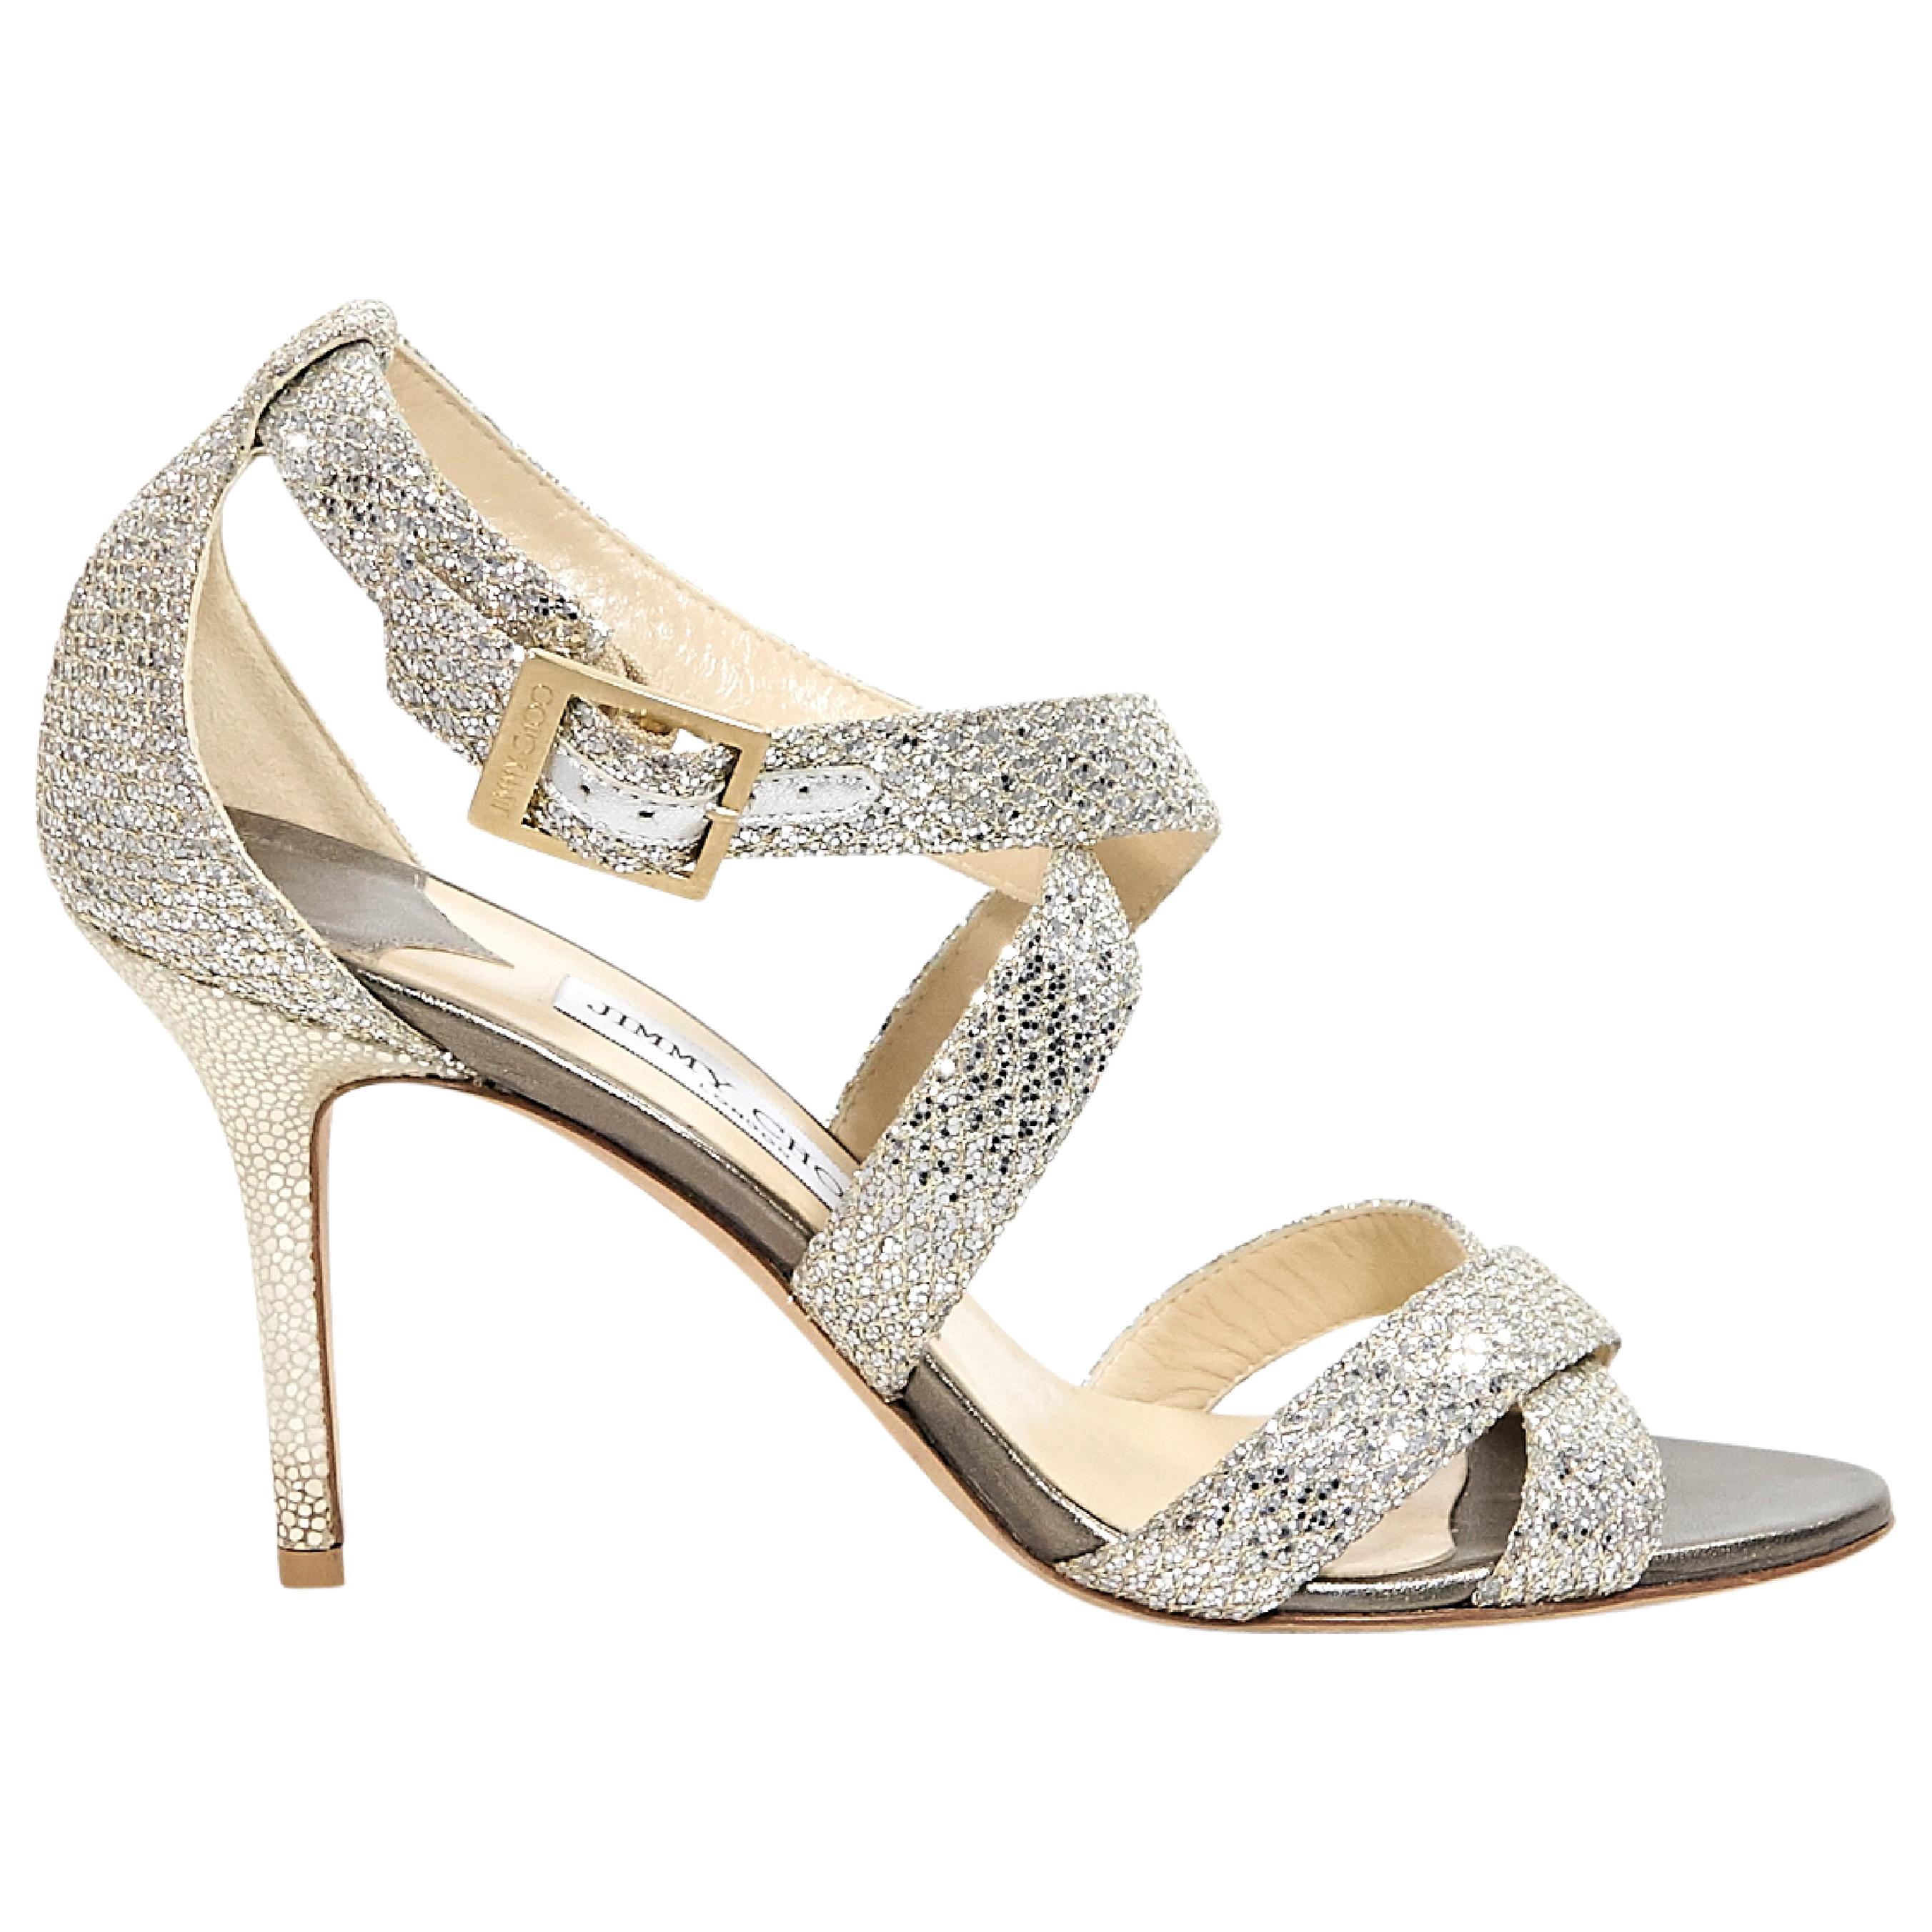 Gold & Silver Jimmy Choo Glittered Strappy Sandals